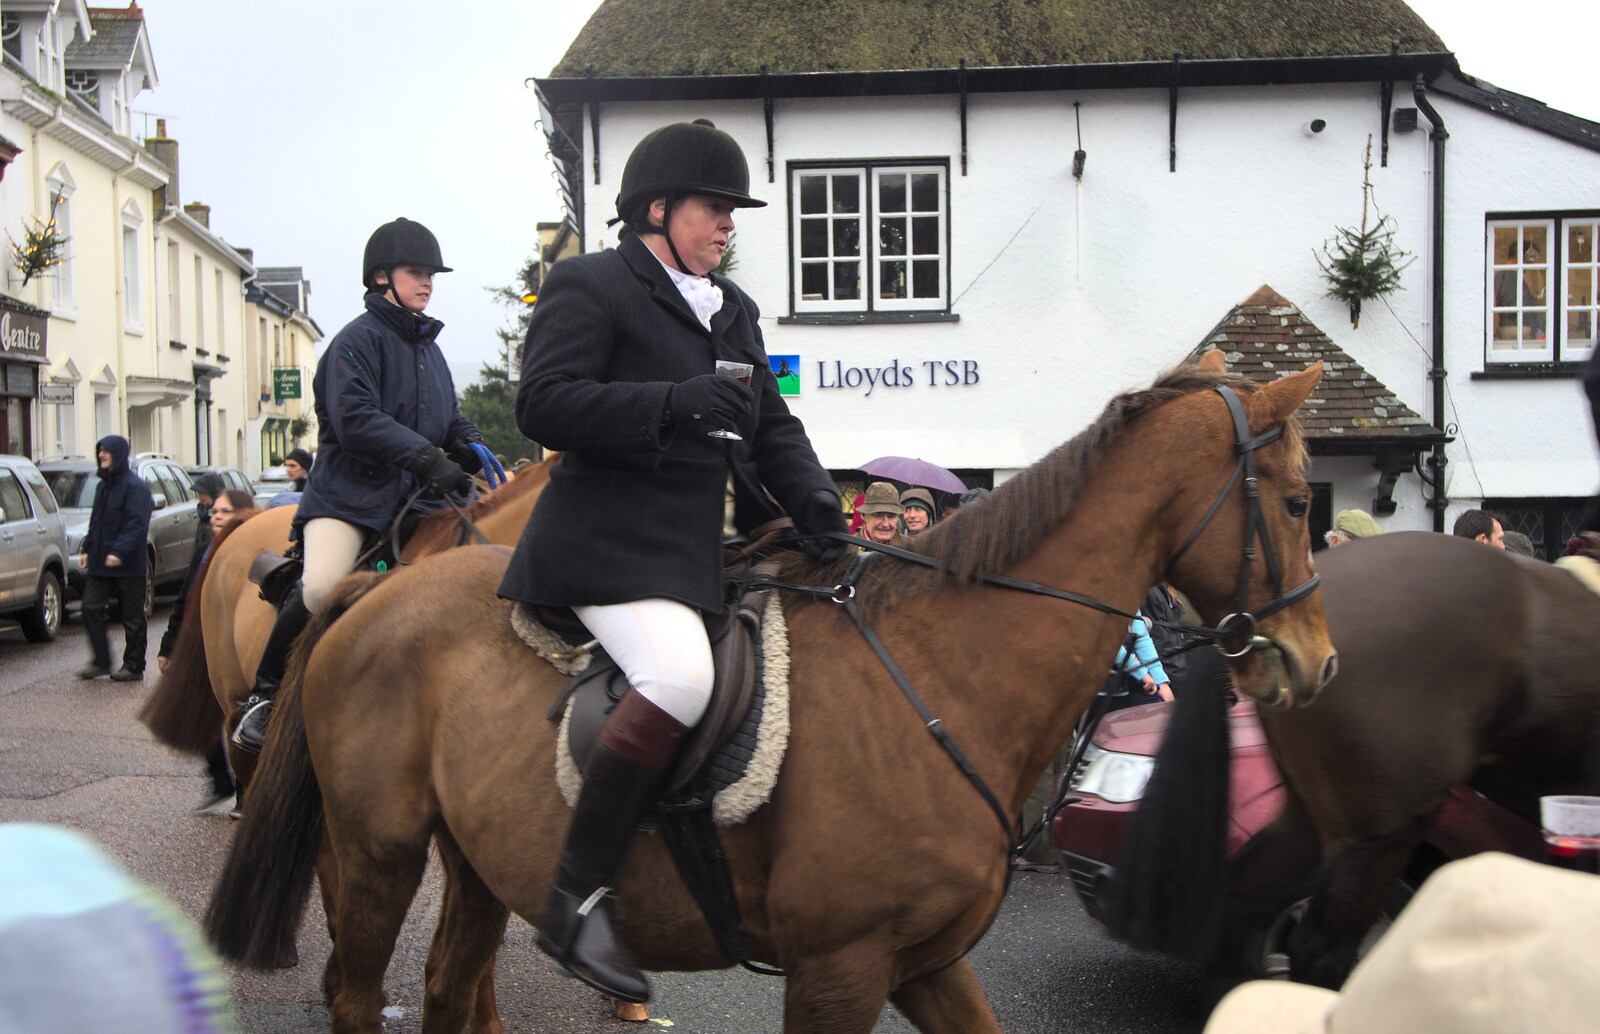 A horseback rum and coke from The Boxing Day Hunt, Chagford, Devon - 26th December 2012